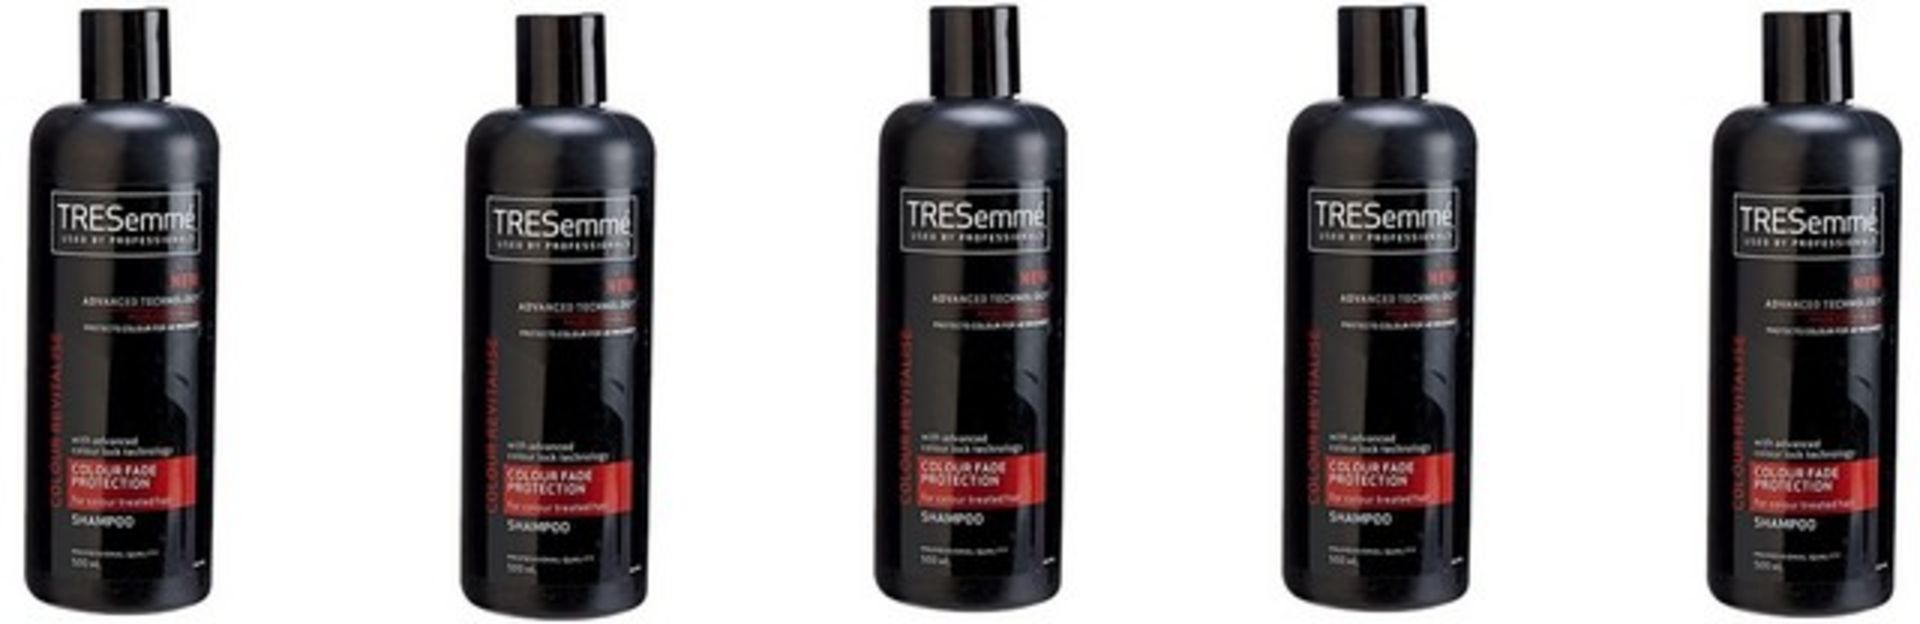 + VAT Brand New A Lot Of Five 500ml TRESemme Colour Revitalise Colour Fade Protection Shampoo ISP